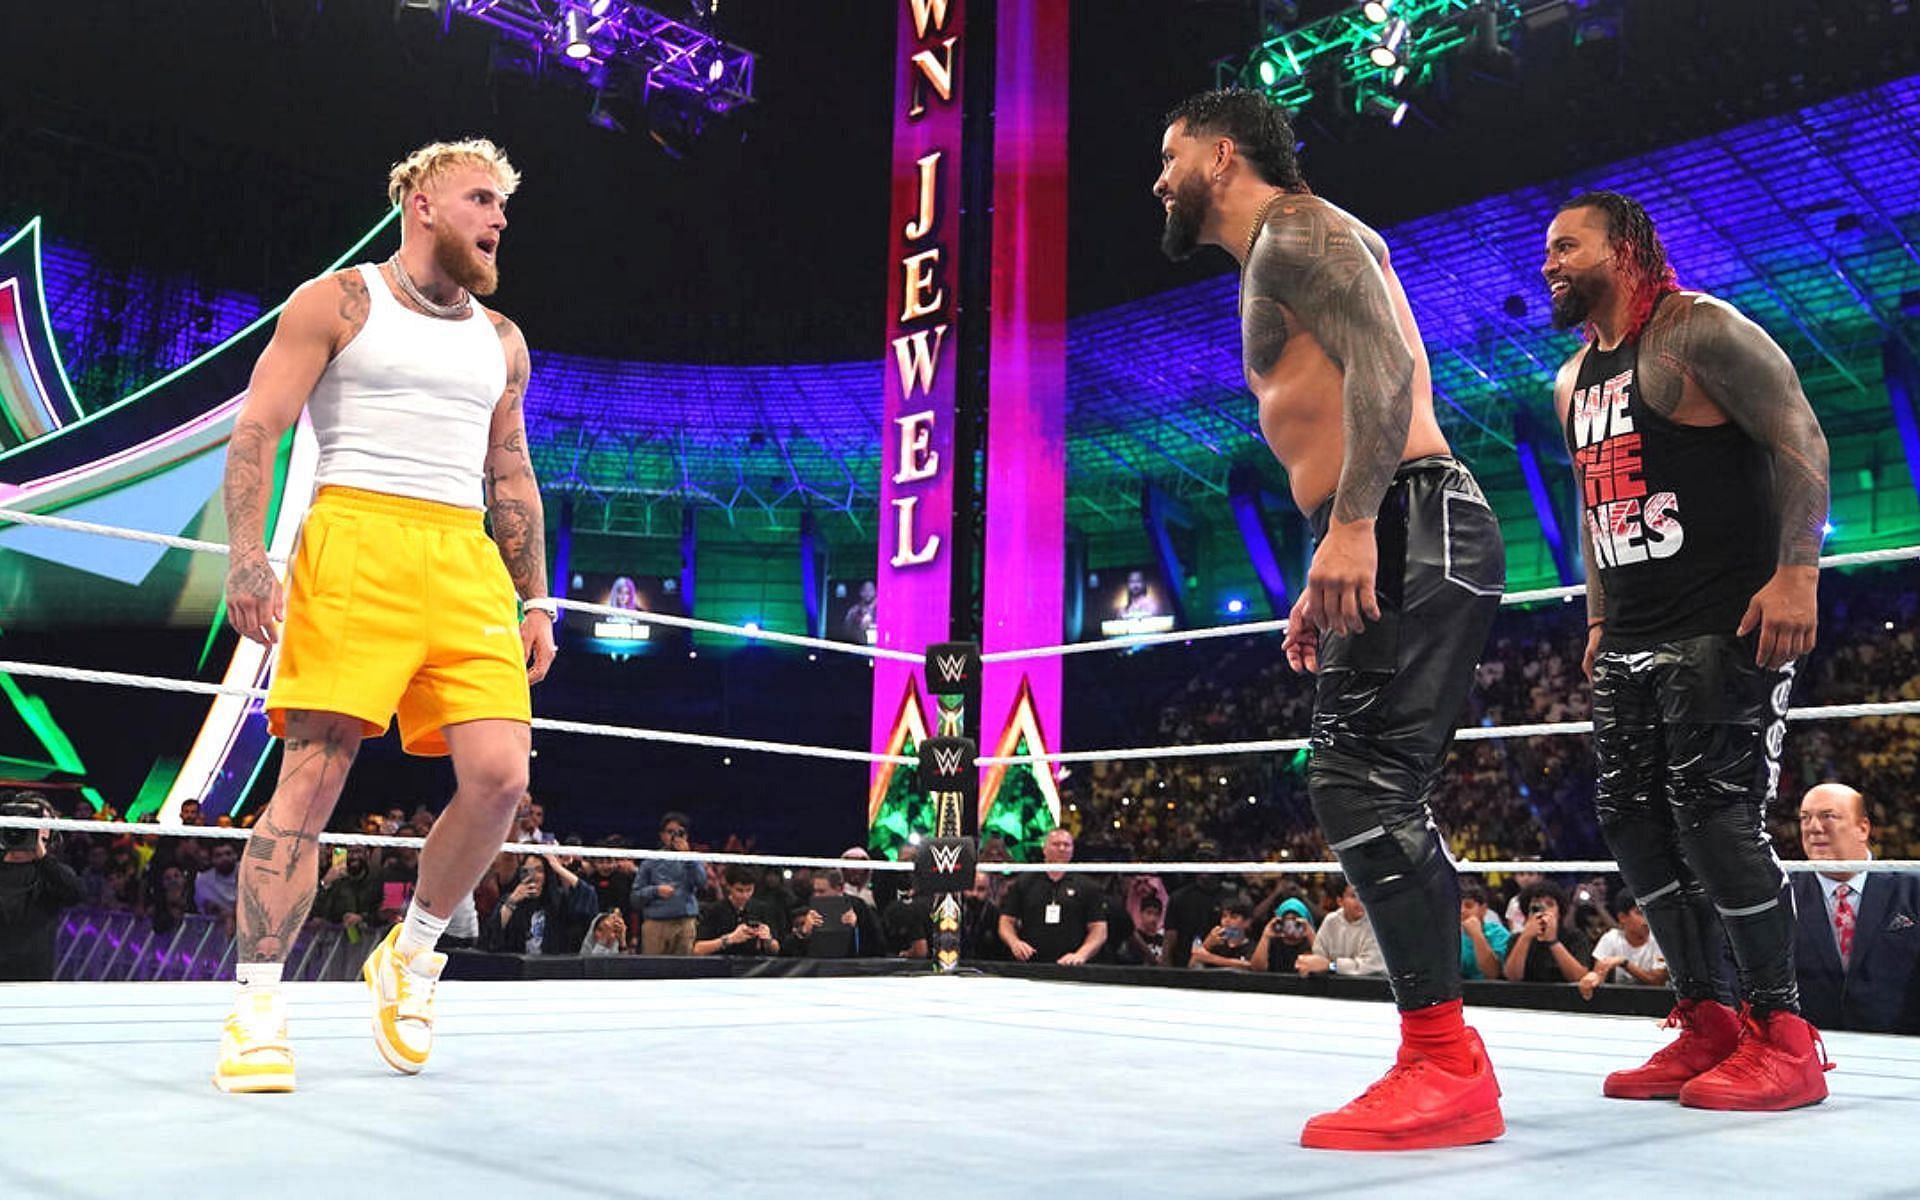 Jake Paul wants a match against The Usos